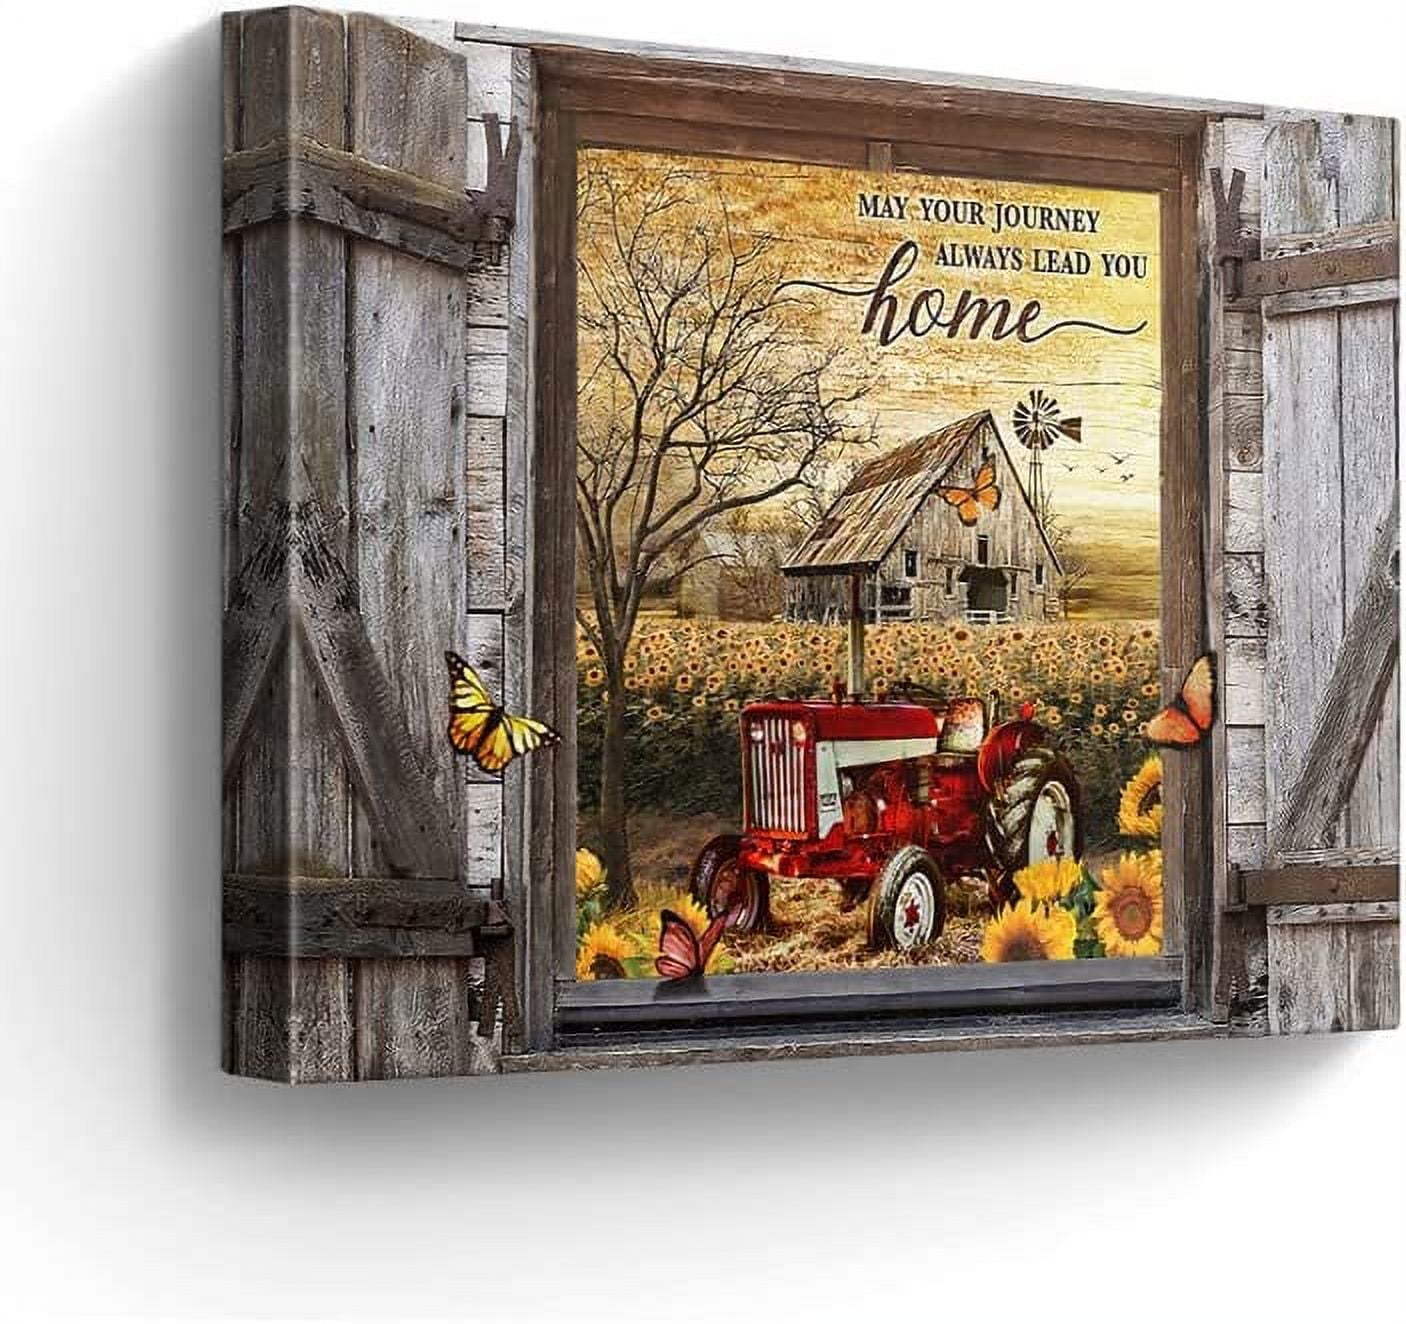 Farmhouse Cow Pictures Wall Decor Angus Cattle and Barn Country Wall Art  for Bedroom Bathroom Living Room Fake Door Rustic Artwork Framed 12